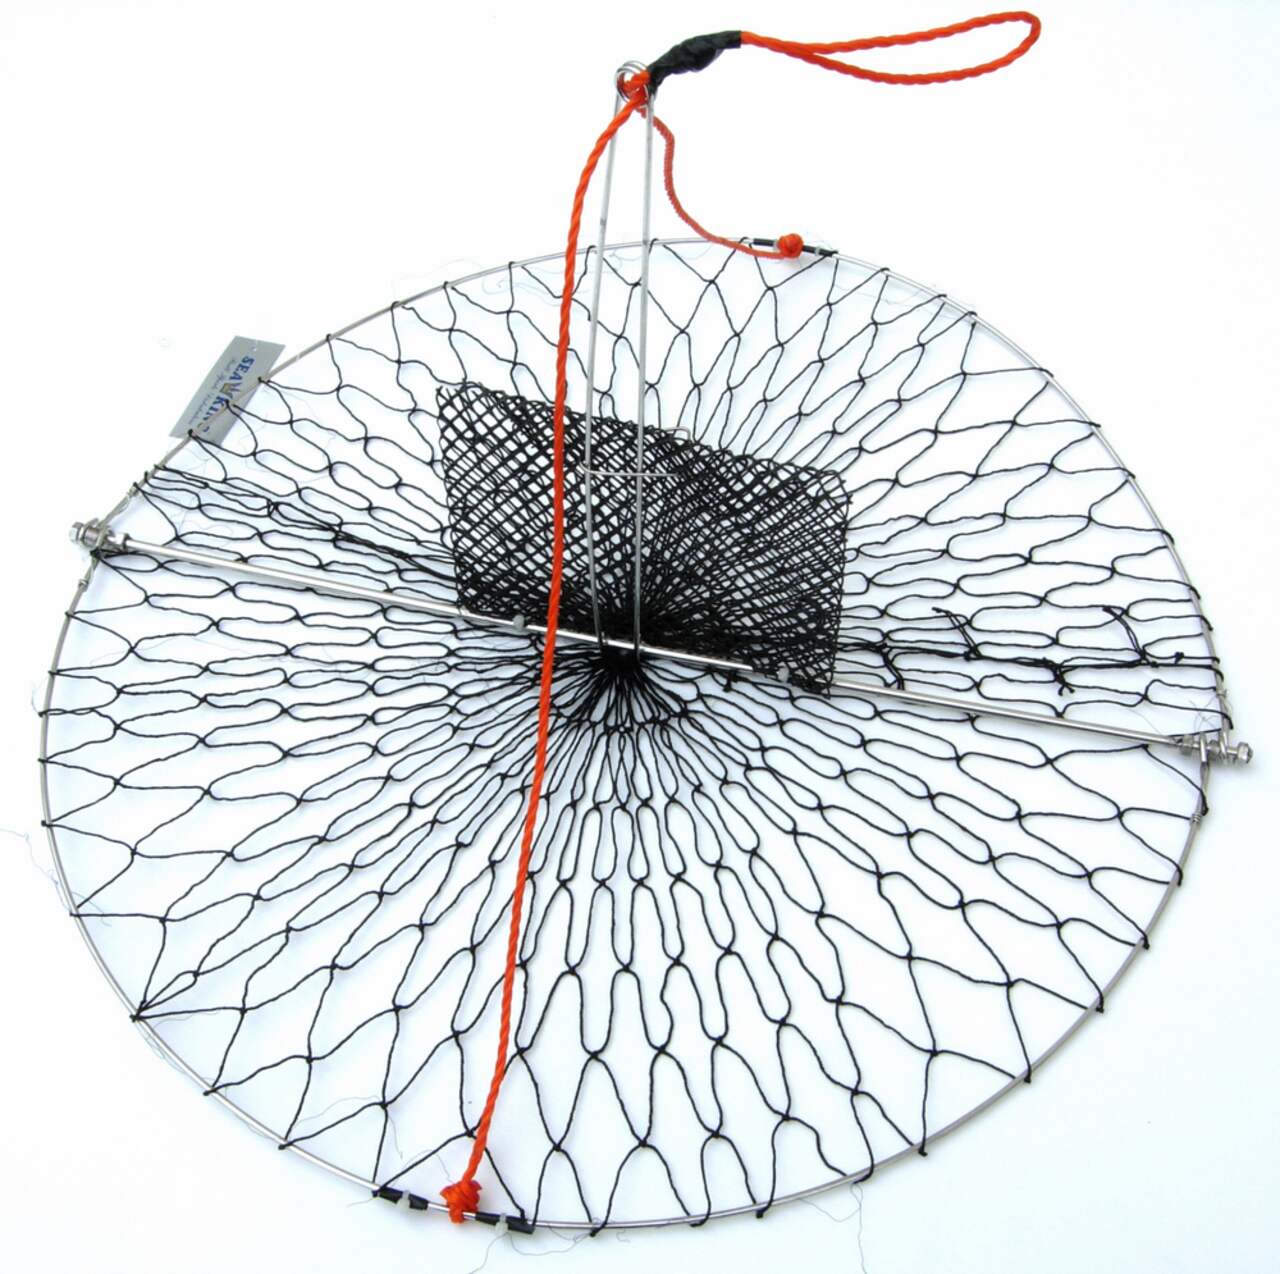 Sea King Casting Crab Trap, 22-in